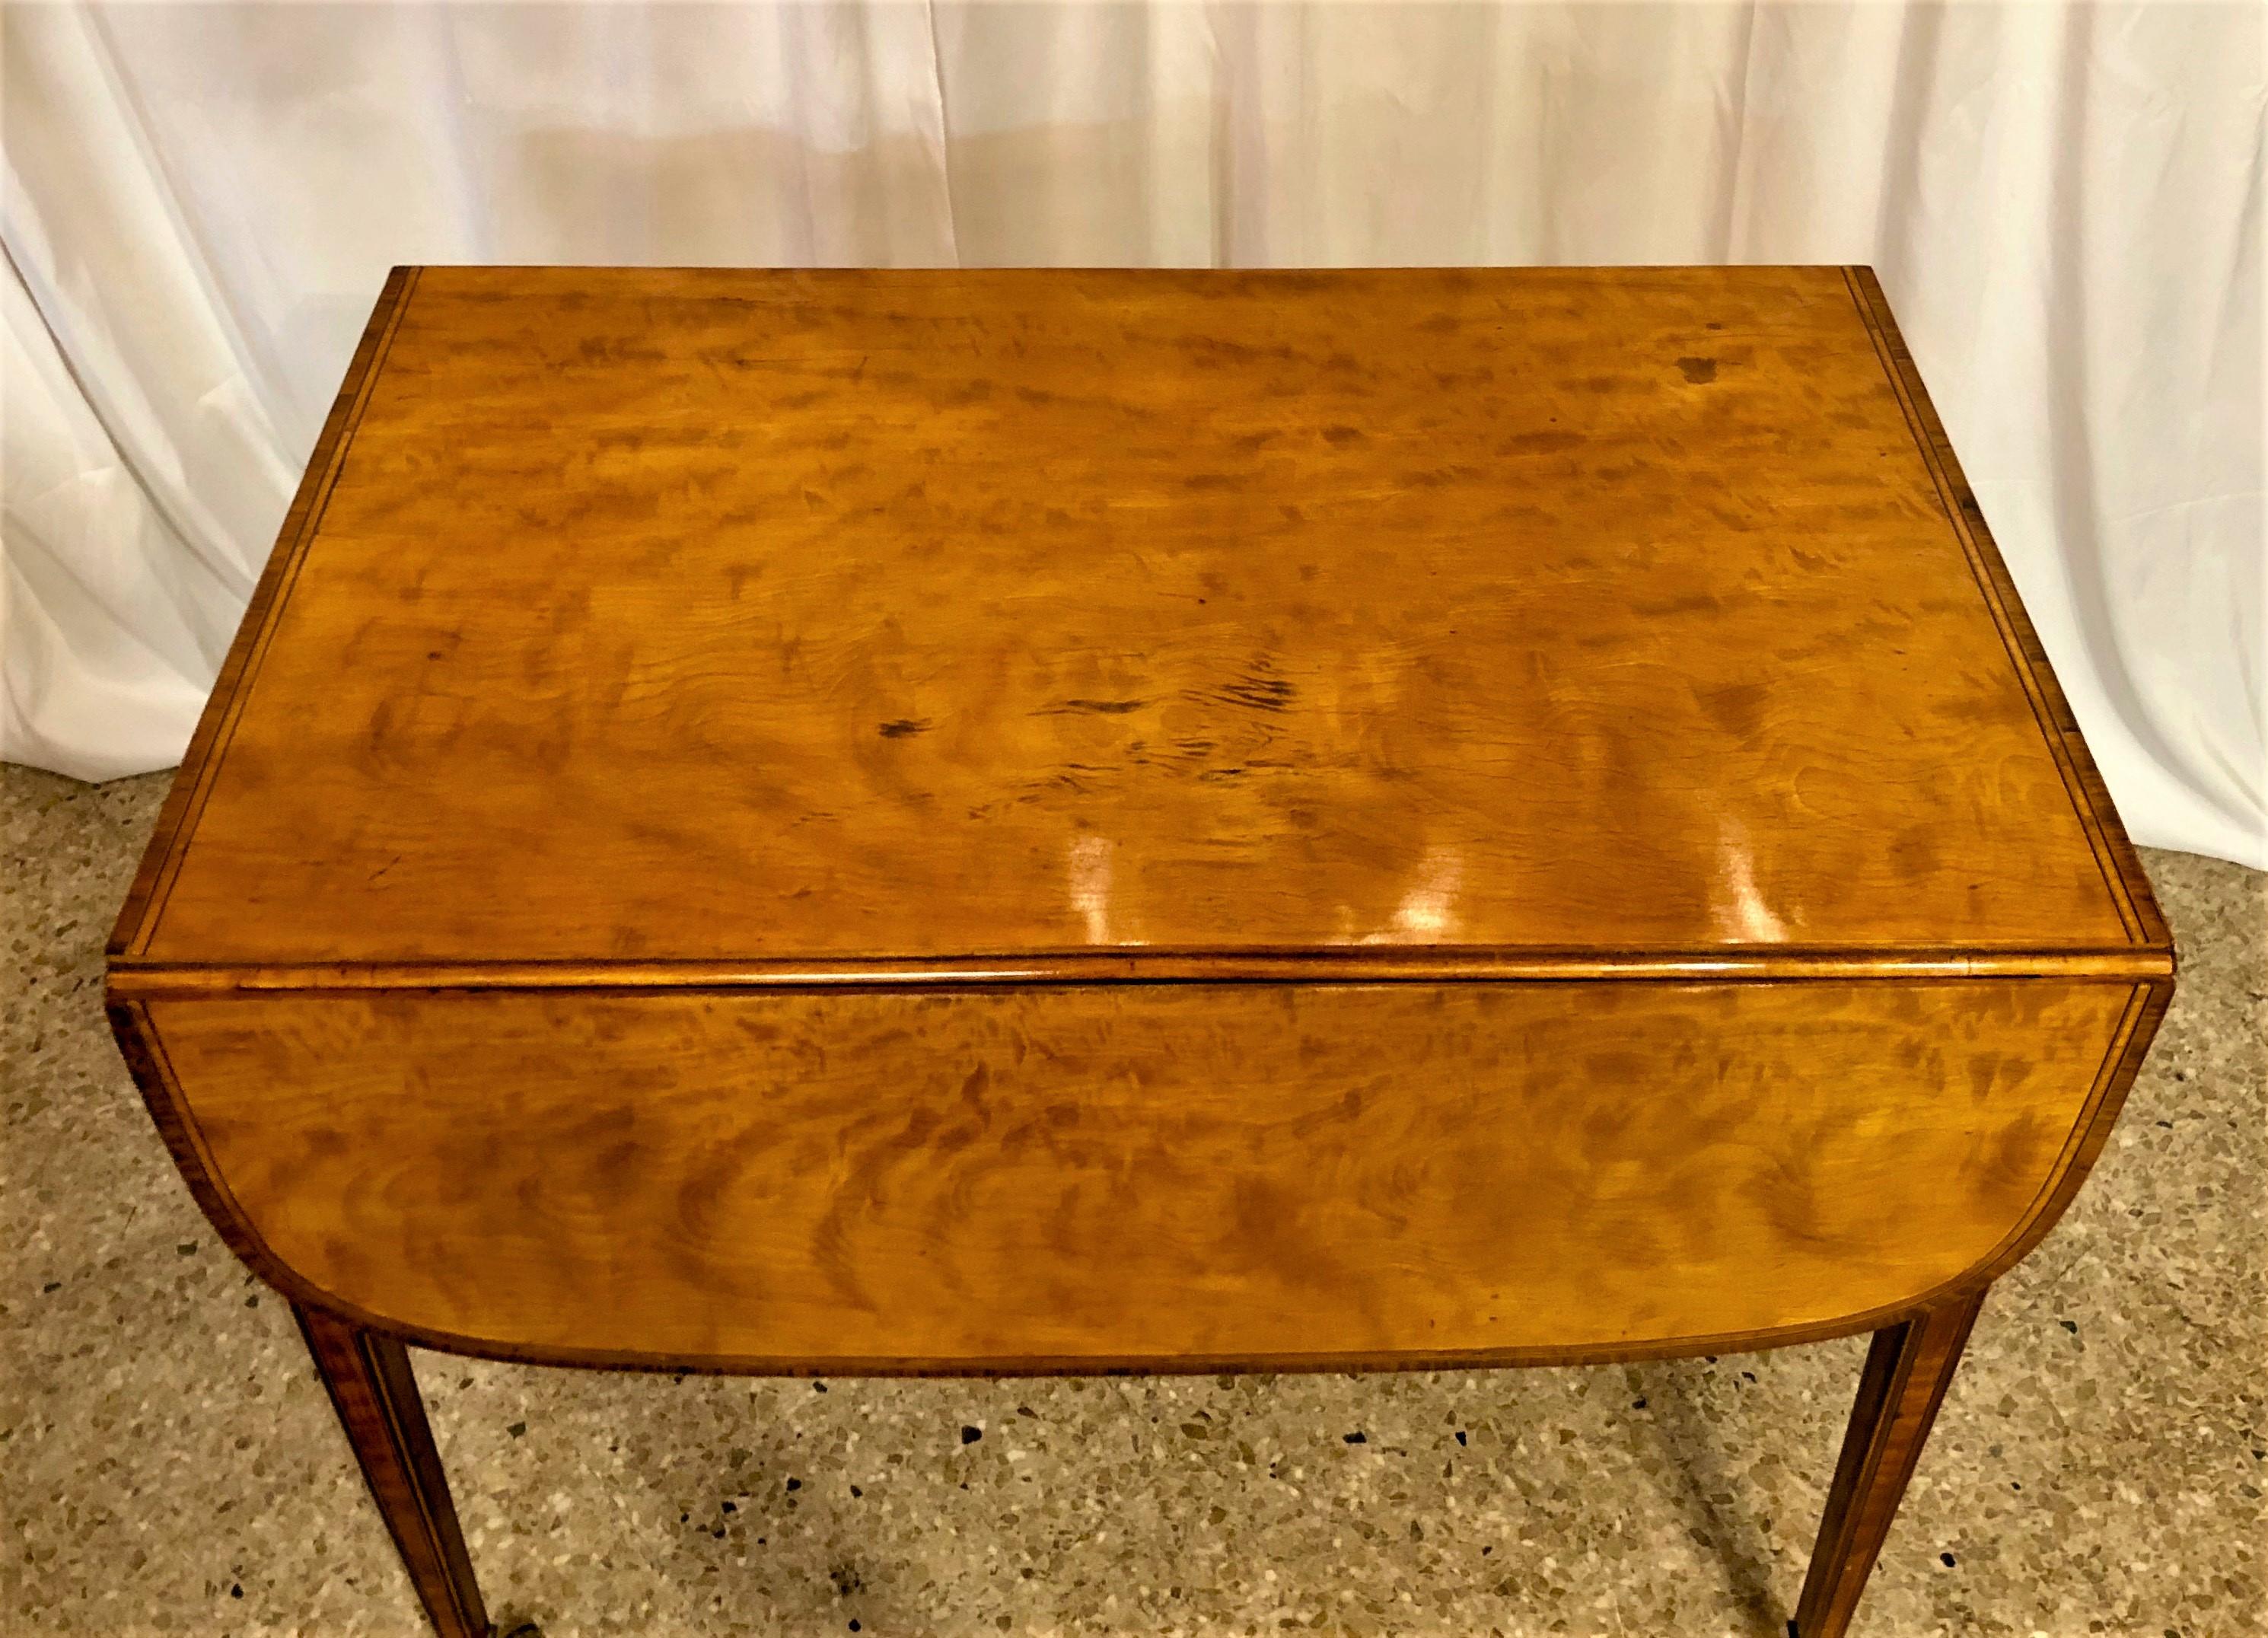 Antique English Satinwood Drop Leaf Table, circa 1810-1820 For Sale 1